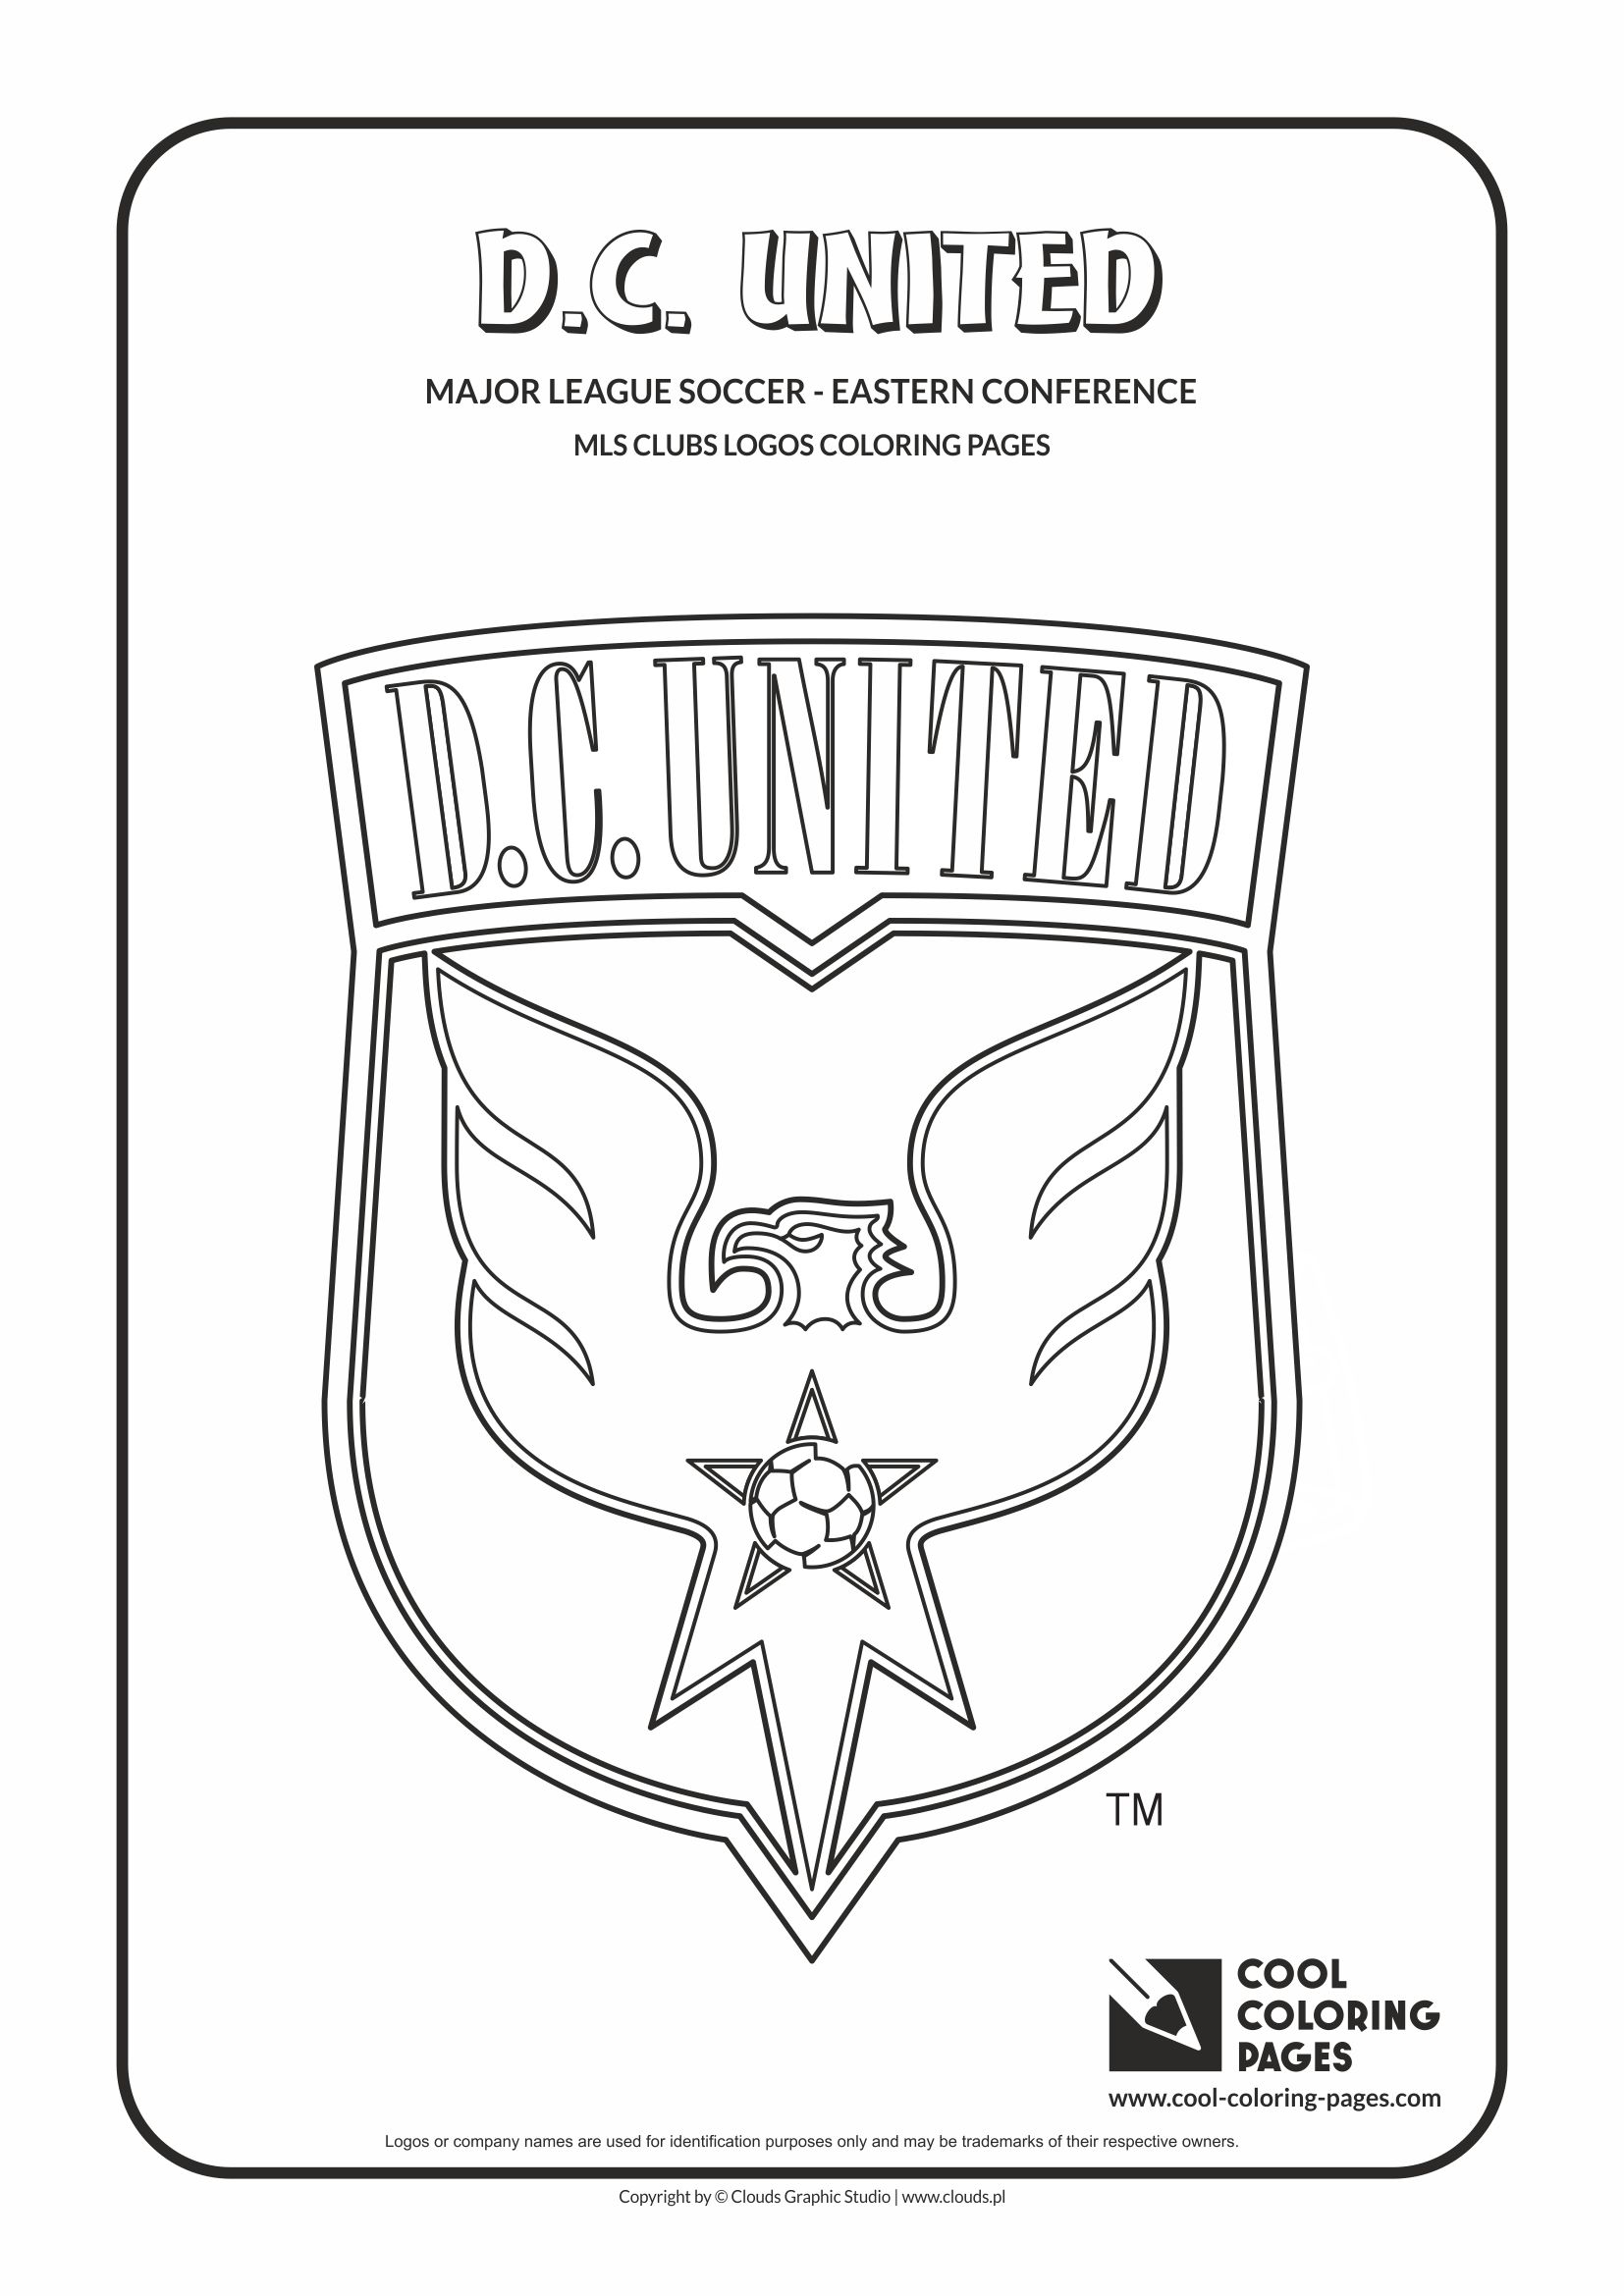 Cool Coloring Pages D.C. United logo coloring pages - Cool Coloring